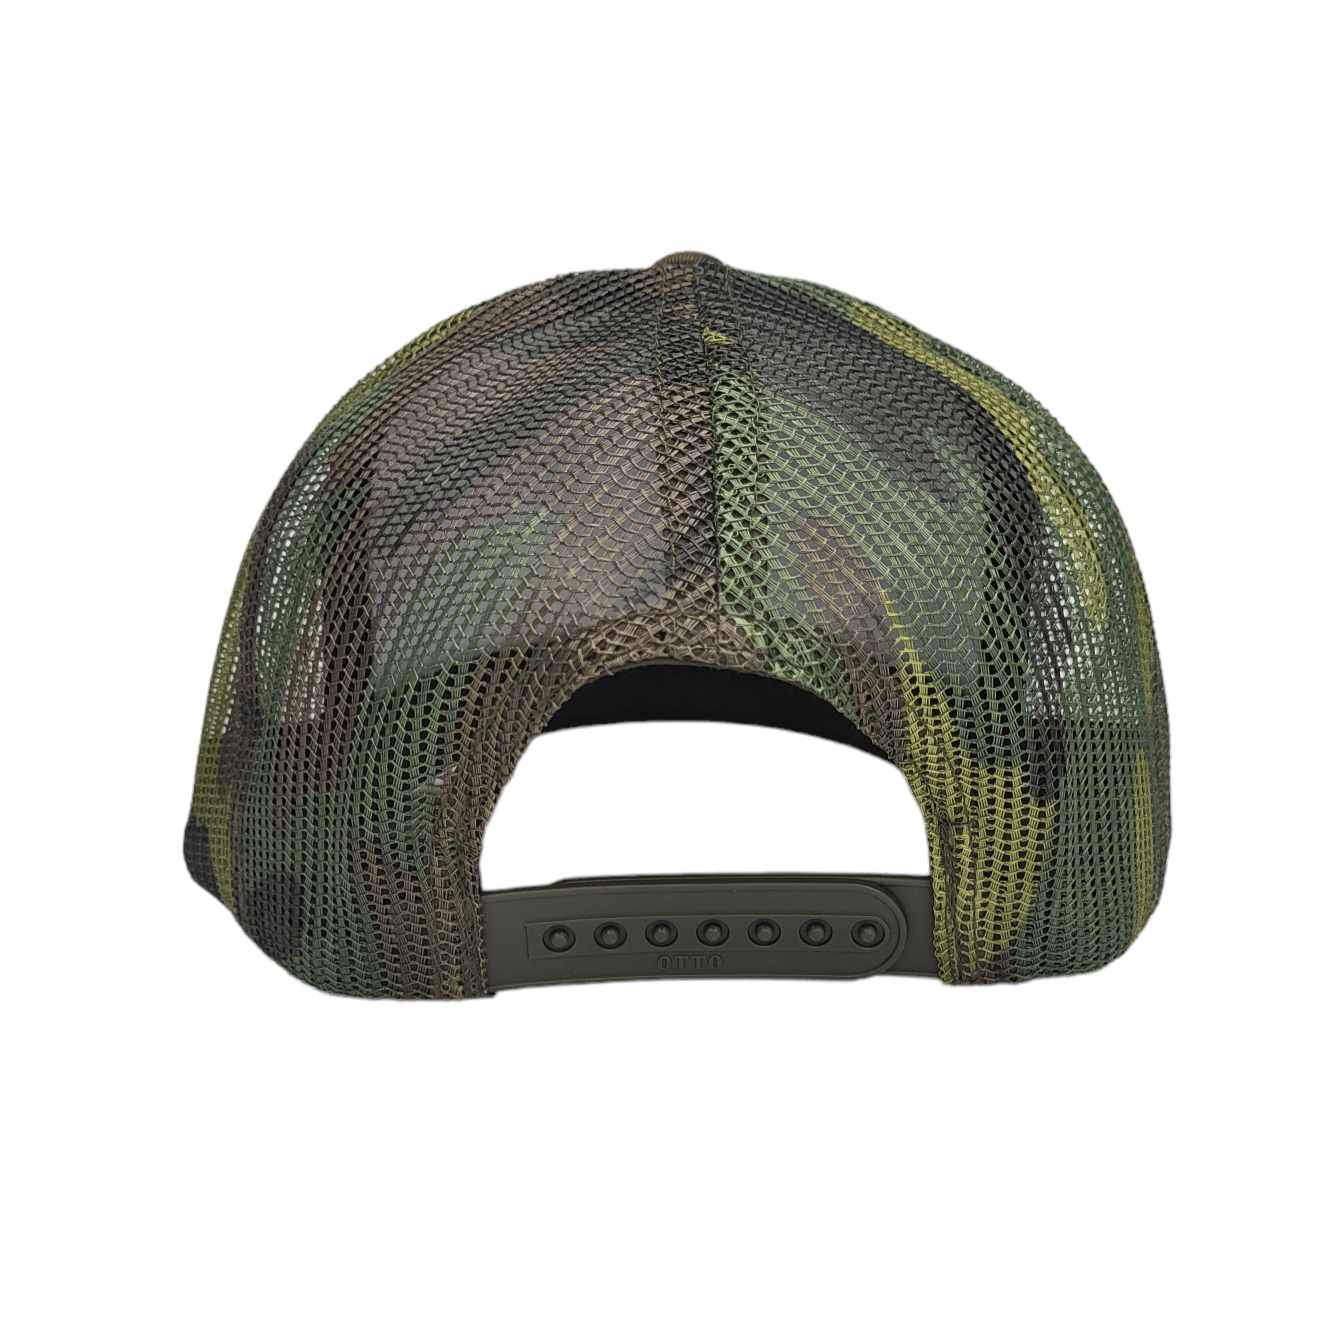 Outdoors Camo Hat